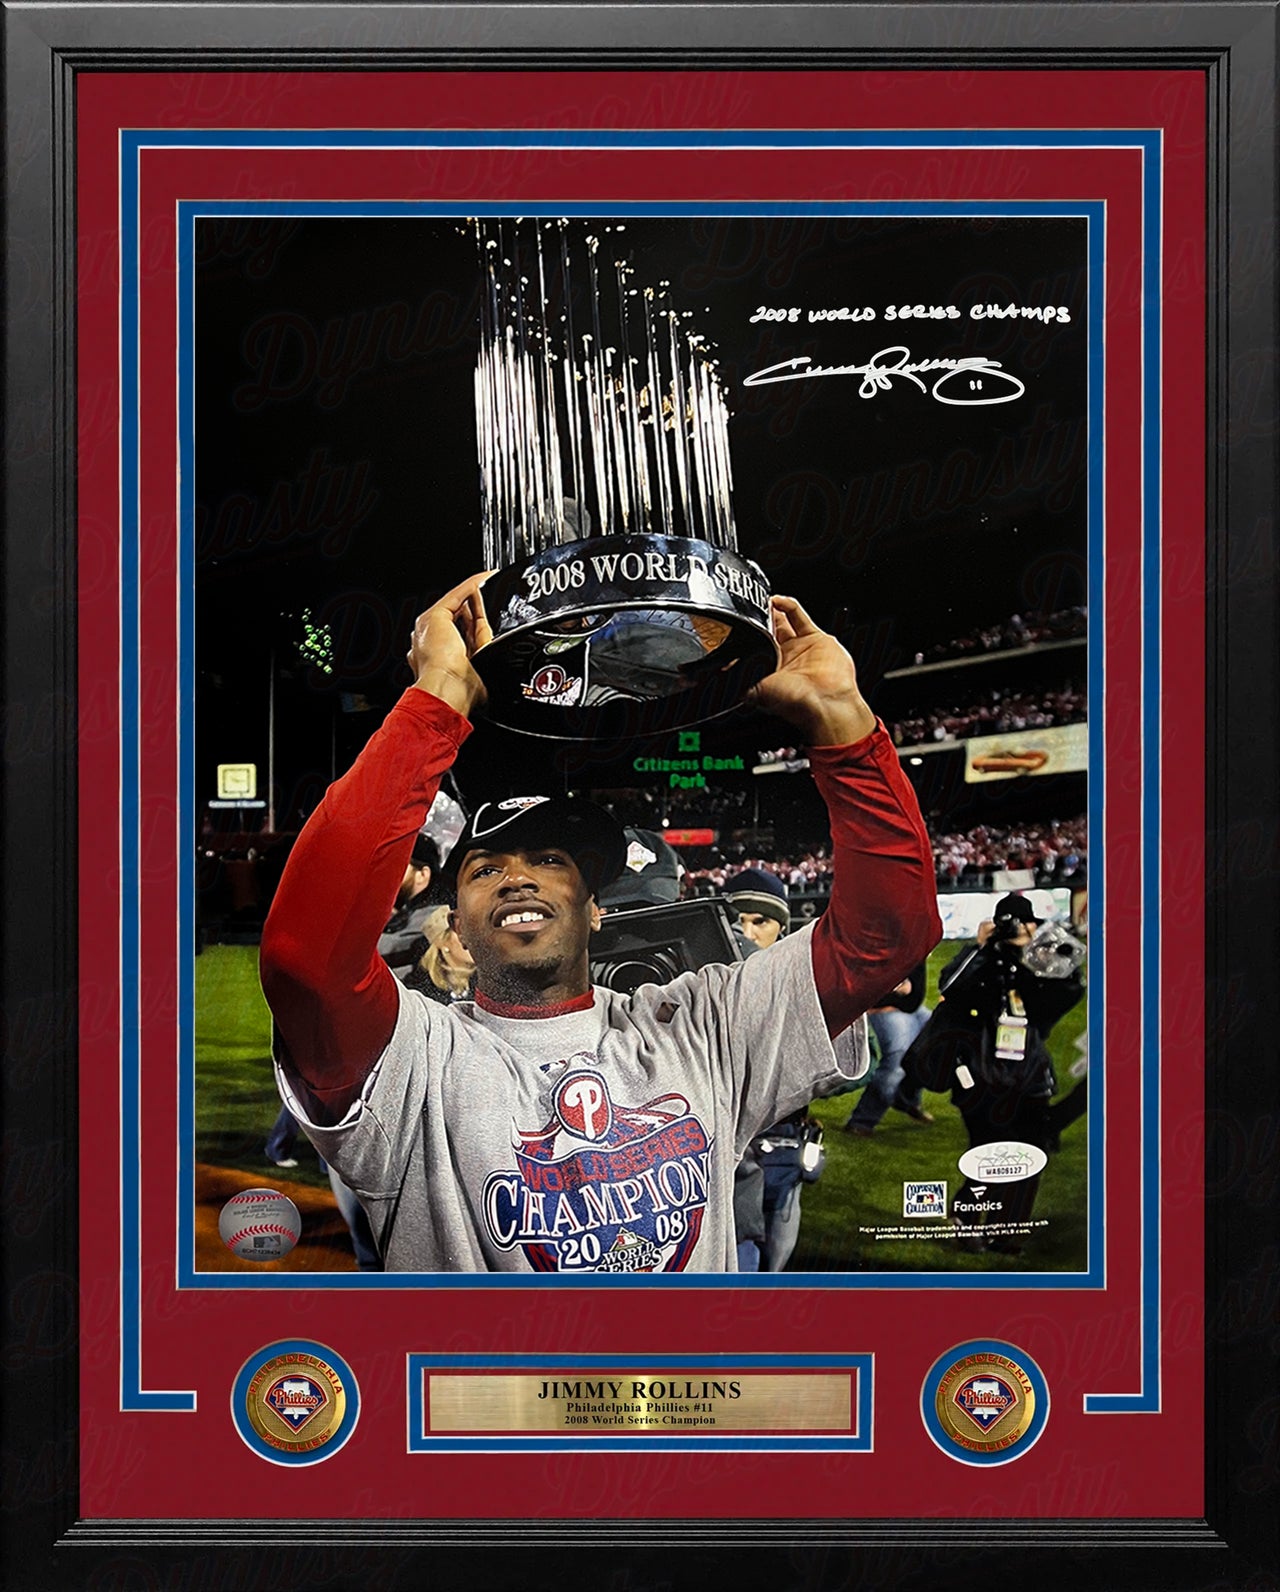 Jimmy Rollins Trophy Autographed Philadelphia Phillies 16x20 Framed Photo: World Series Champs (JSA) - Dynasty Sports & Framing 